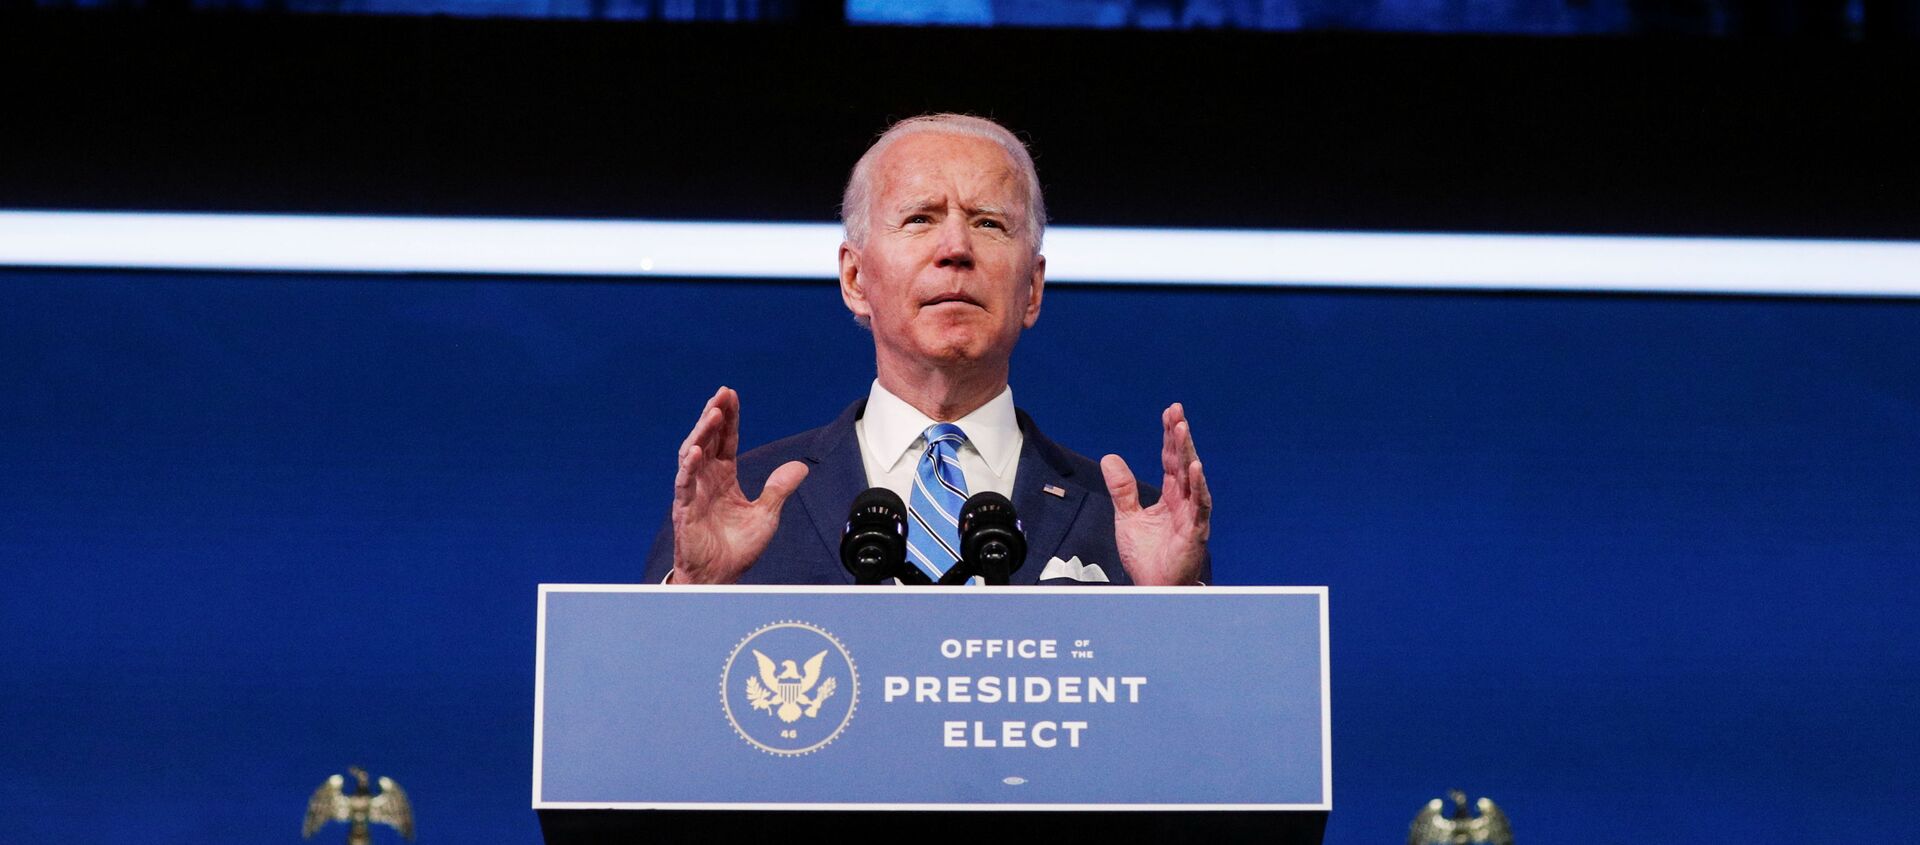 U.S. President-elect Joe Biden delivers remarks during a televised speech on the current economic and health crises at The Queen Theatre in Wilmington, Delaware, U.S., January 14, 2021 - Sputnik International, 1920, 15.01.2021